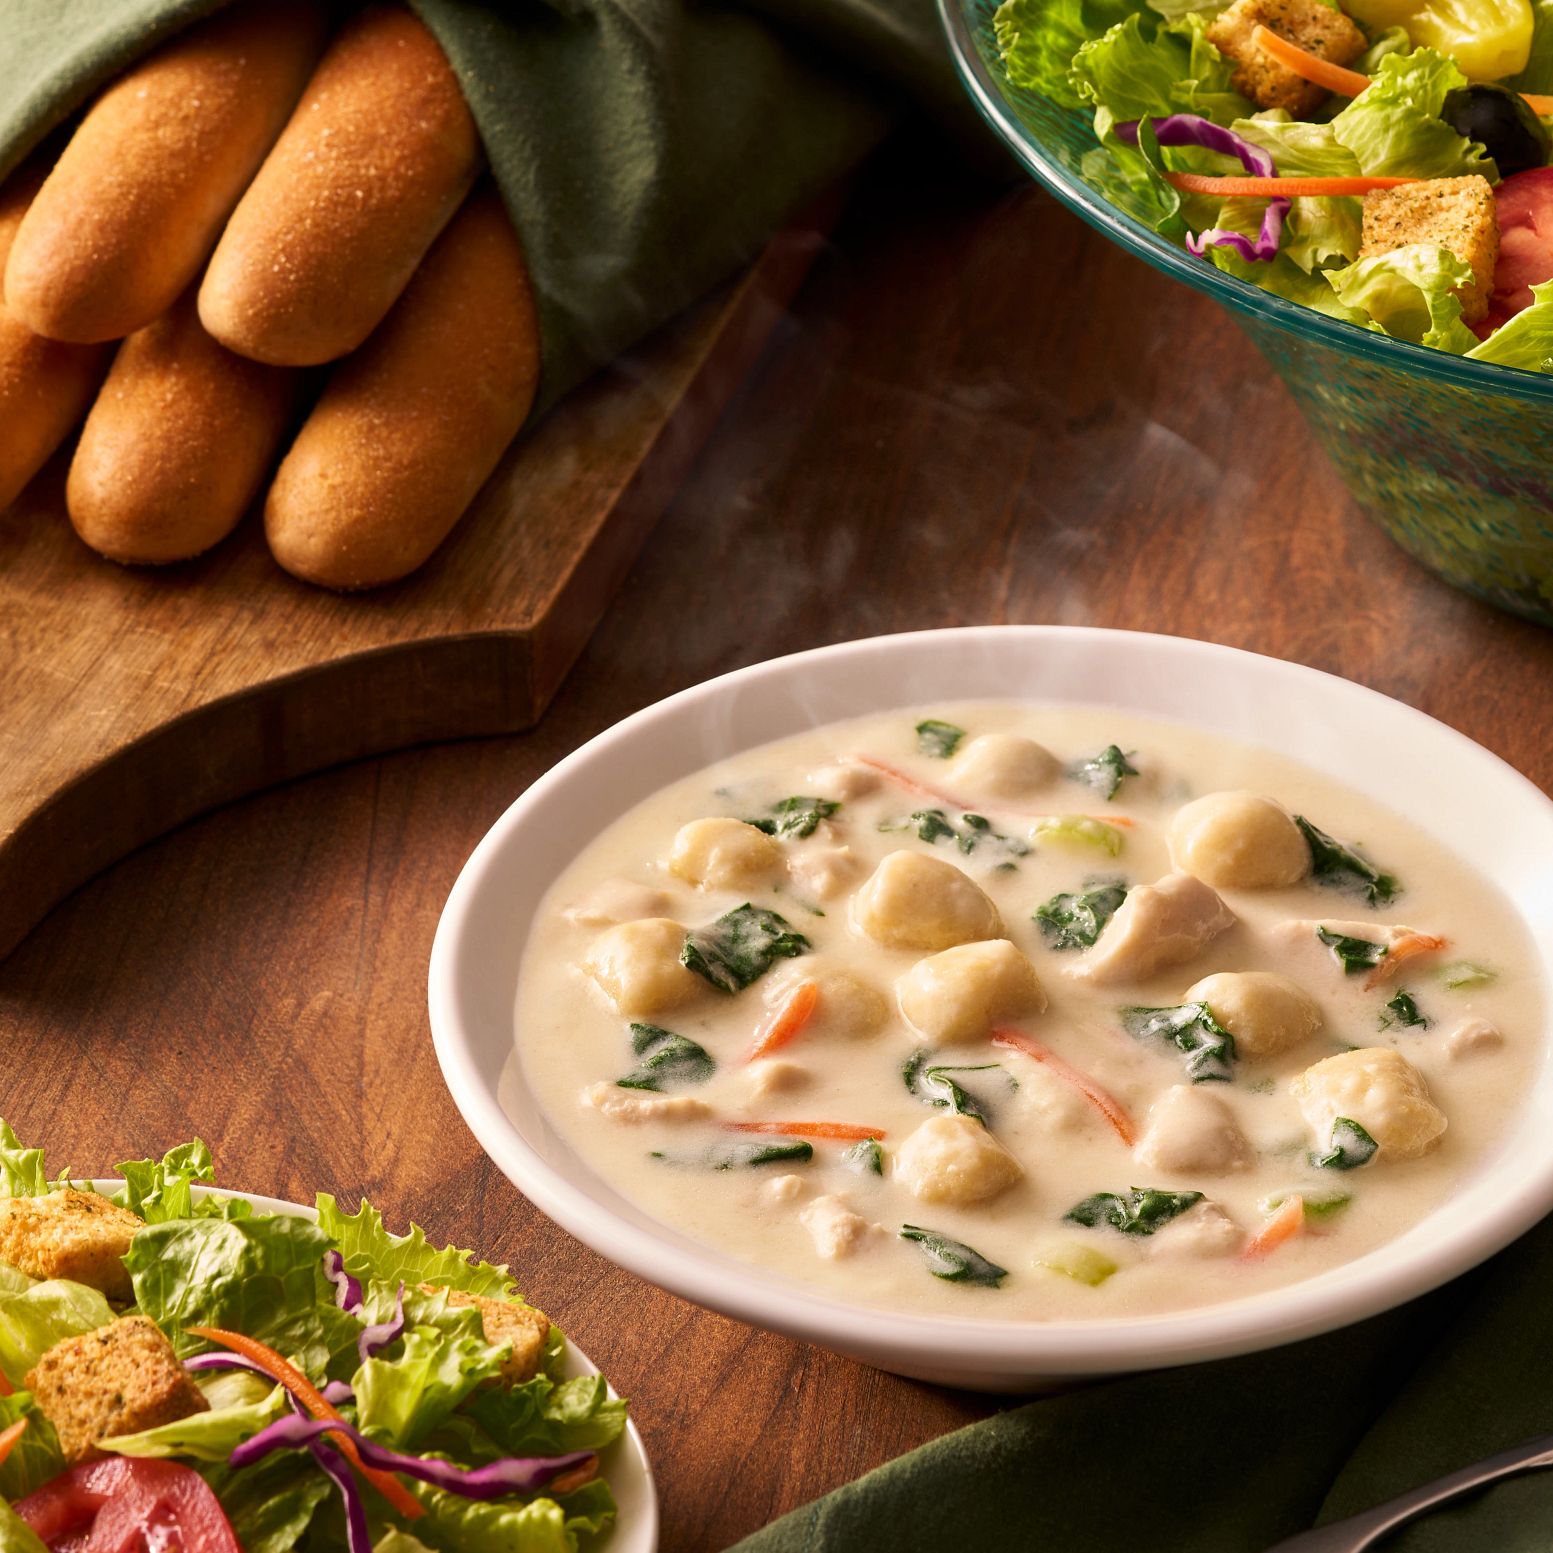 Chicken & Gnocchi: A creamy soup made with roasted chicken, Italian dumplings and spinach. Olive Garden Italian Restaurant Winnipeg (204)774-9725